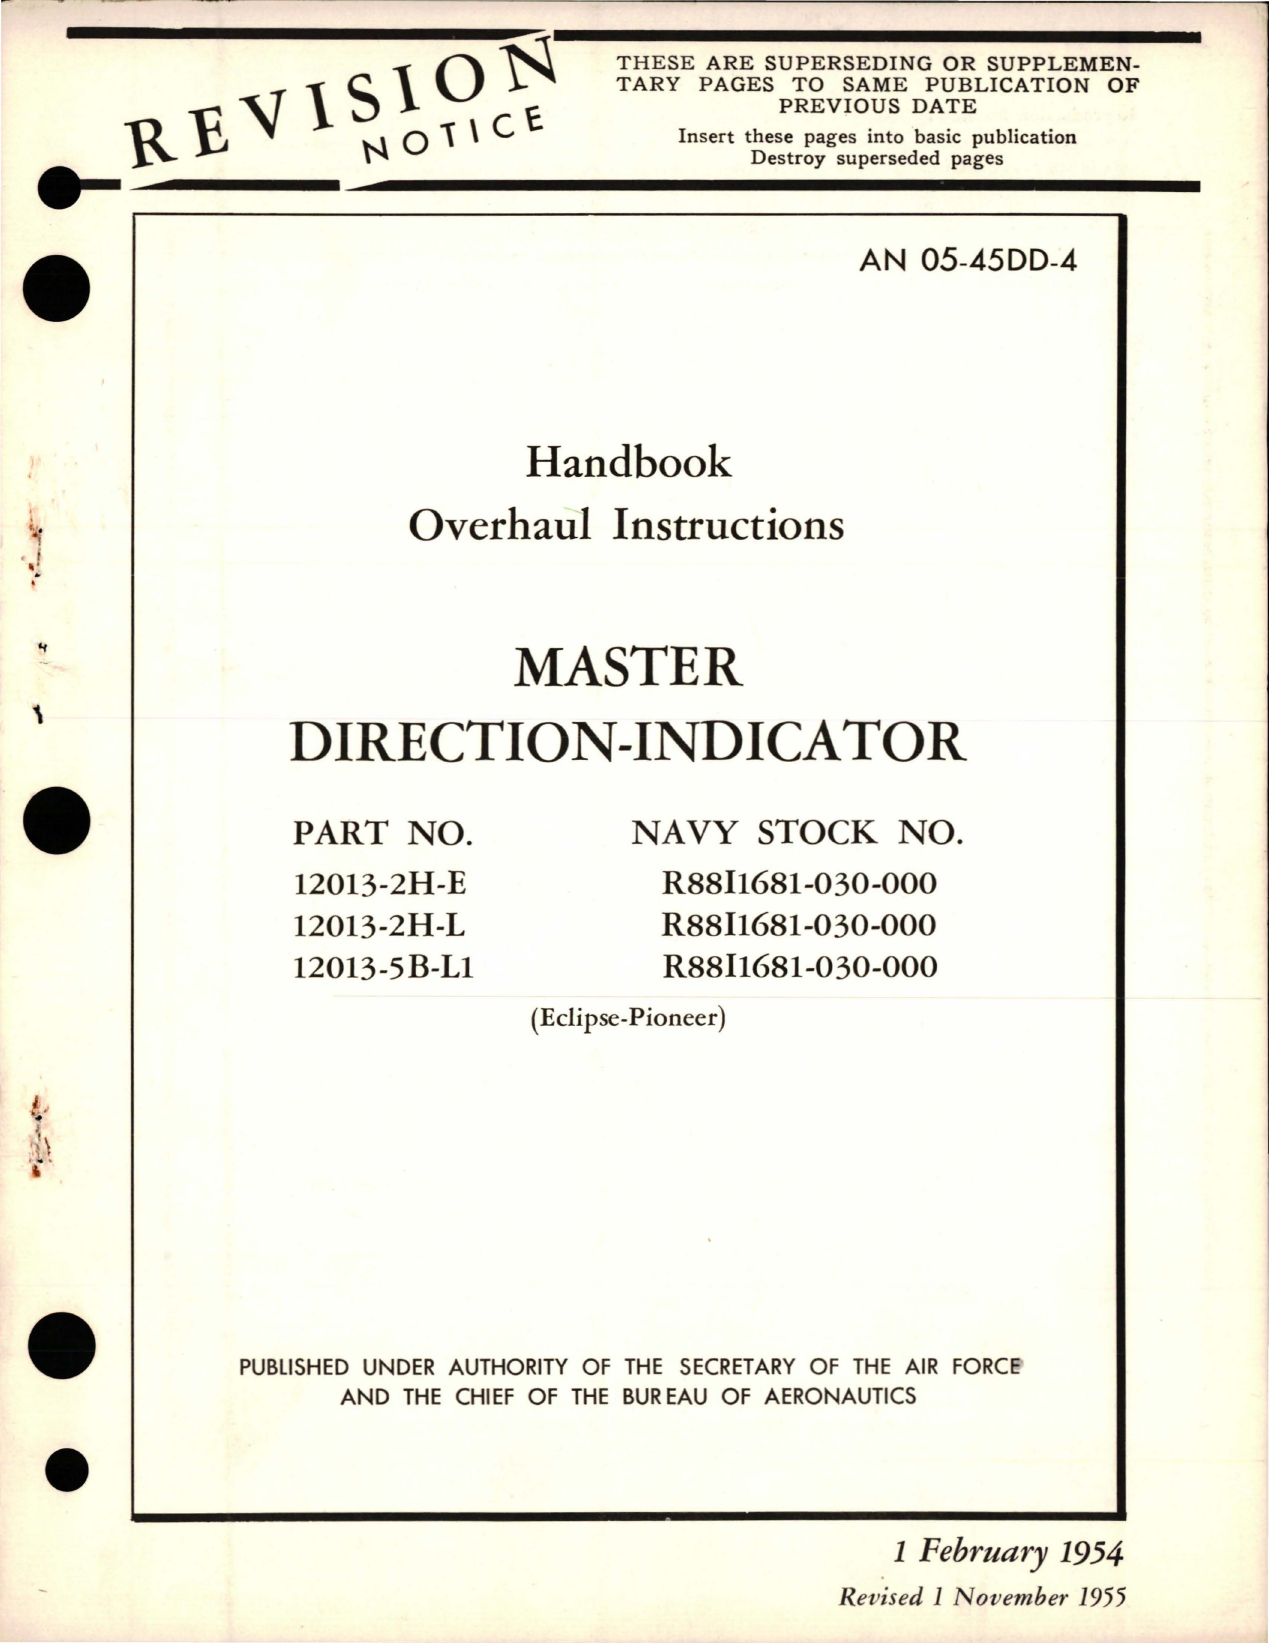 Sample page 1 from AirCorps Library document: Overhaul Instructions for Master Direction Indicator - Parts 12013-2H-E, 12013-2H-L, and 12013-5B-L1